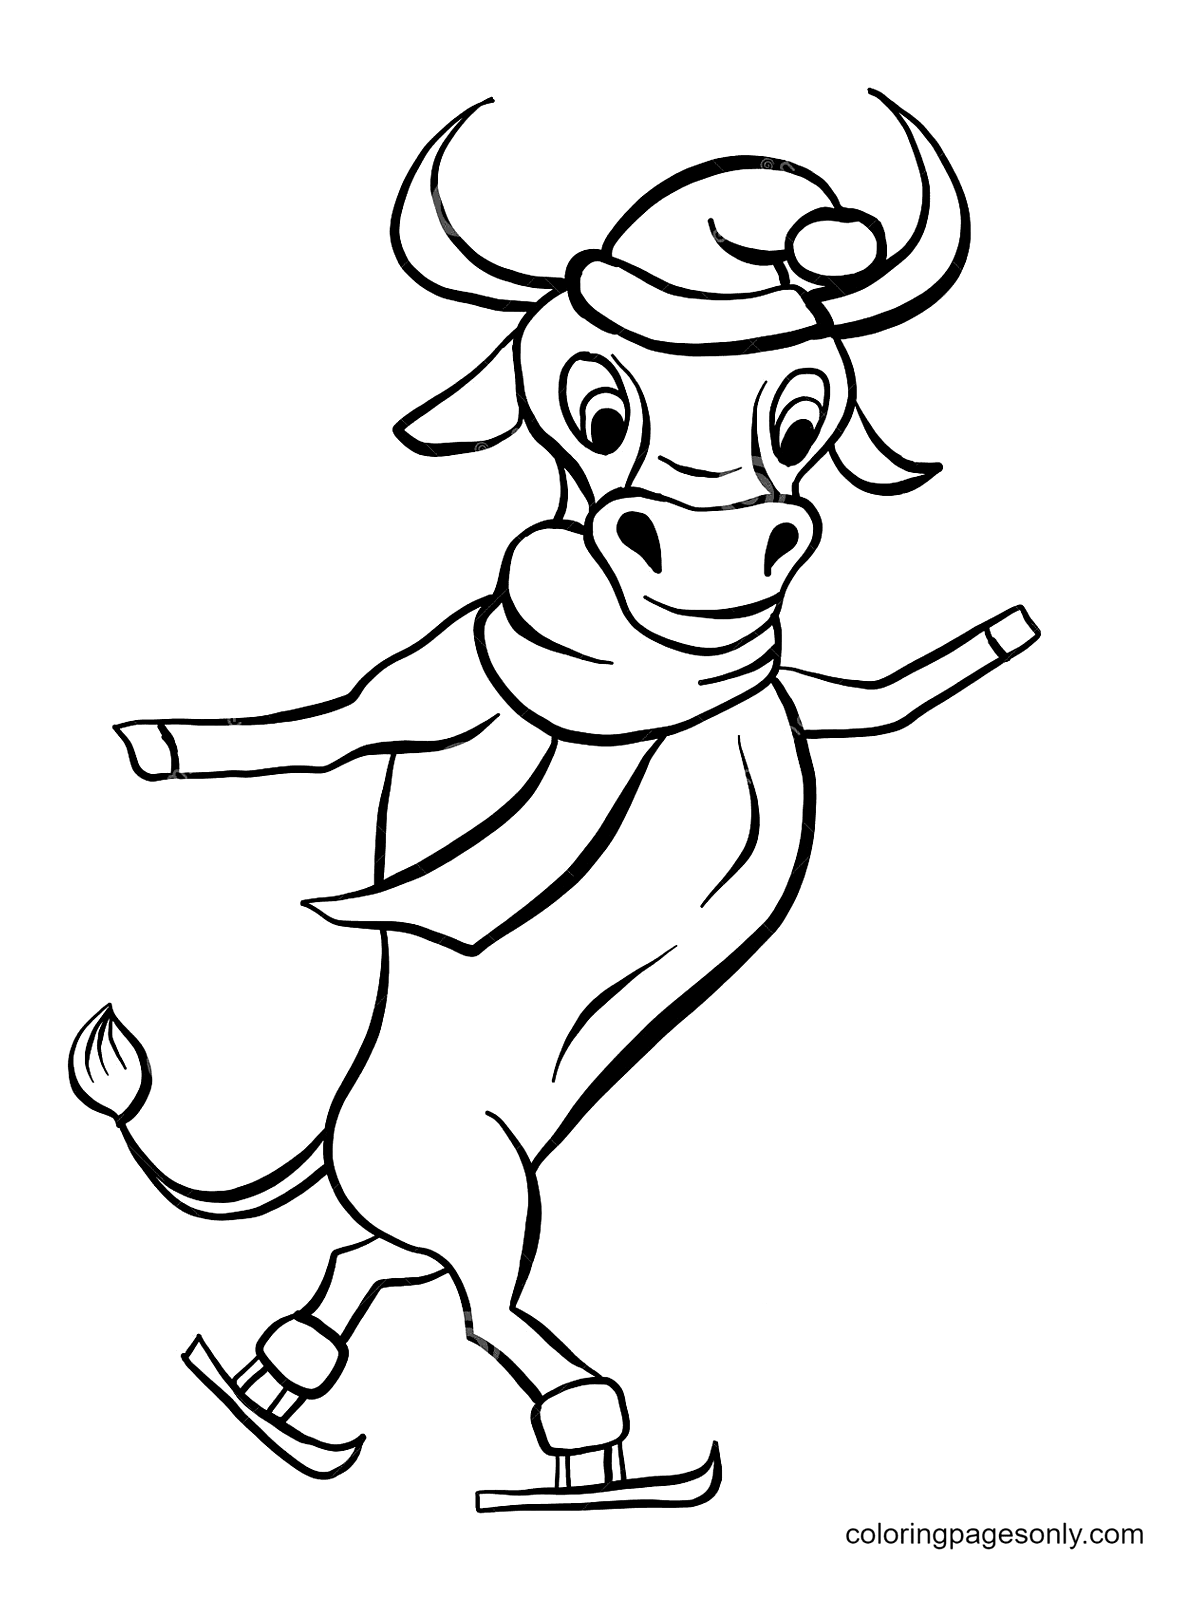 Skating Cow Coloring Pages